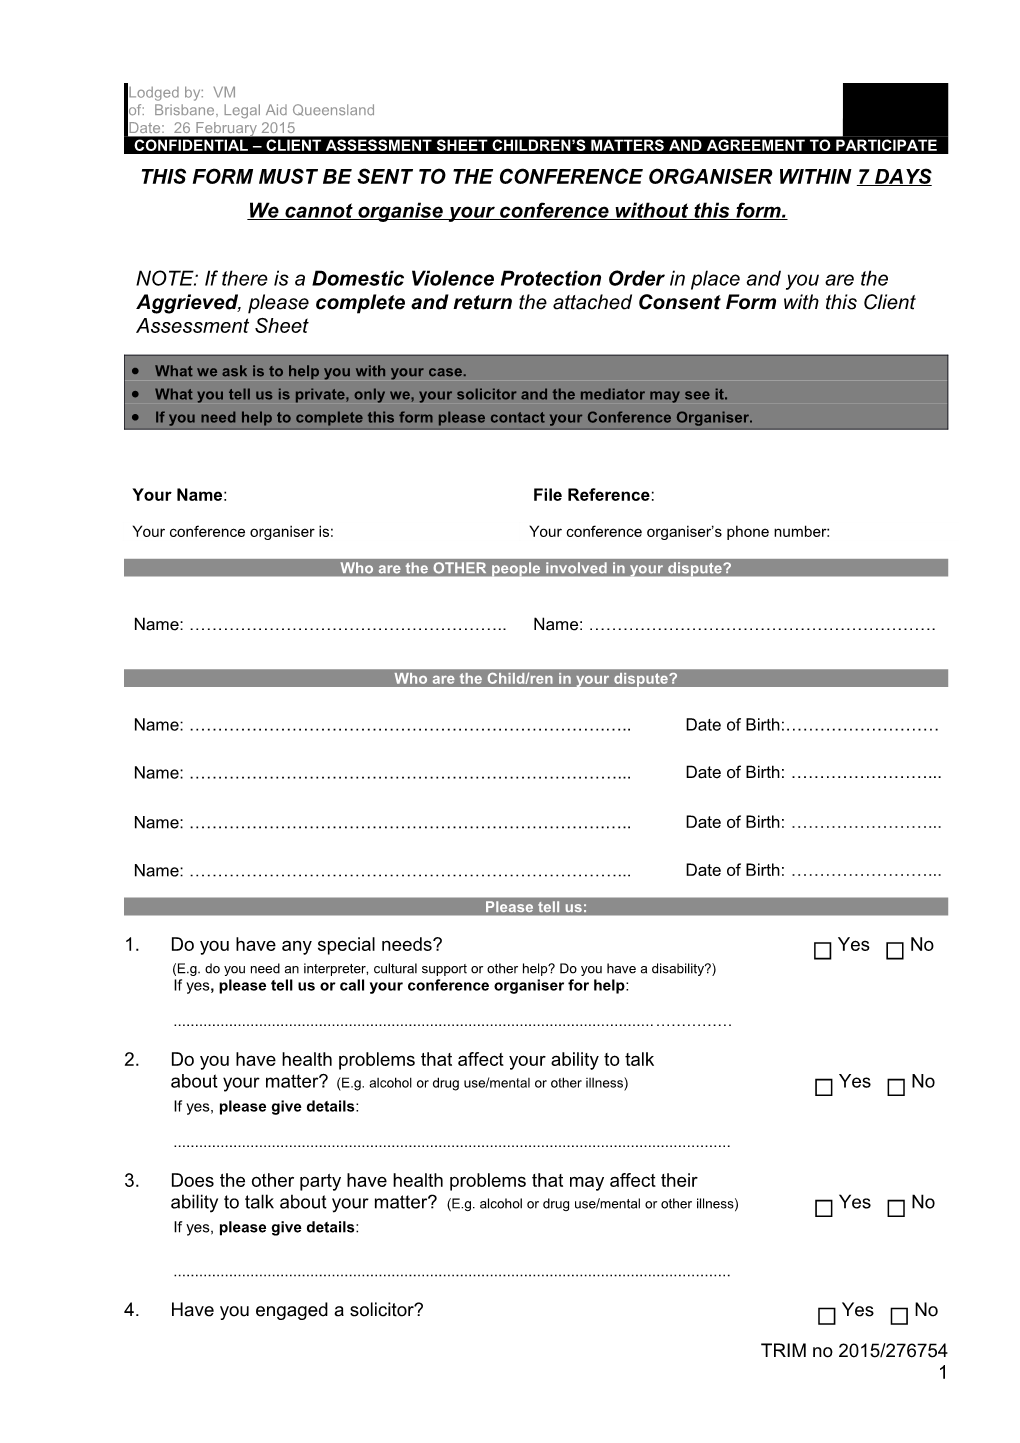 Confidential Client Assessment Sheet Children S Matters and Agreement to Participate